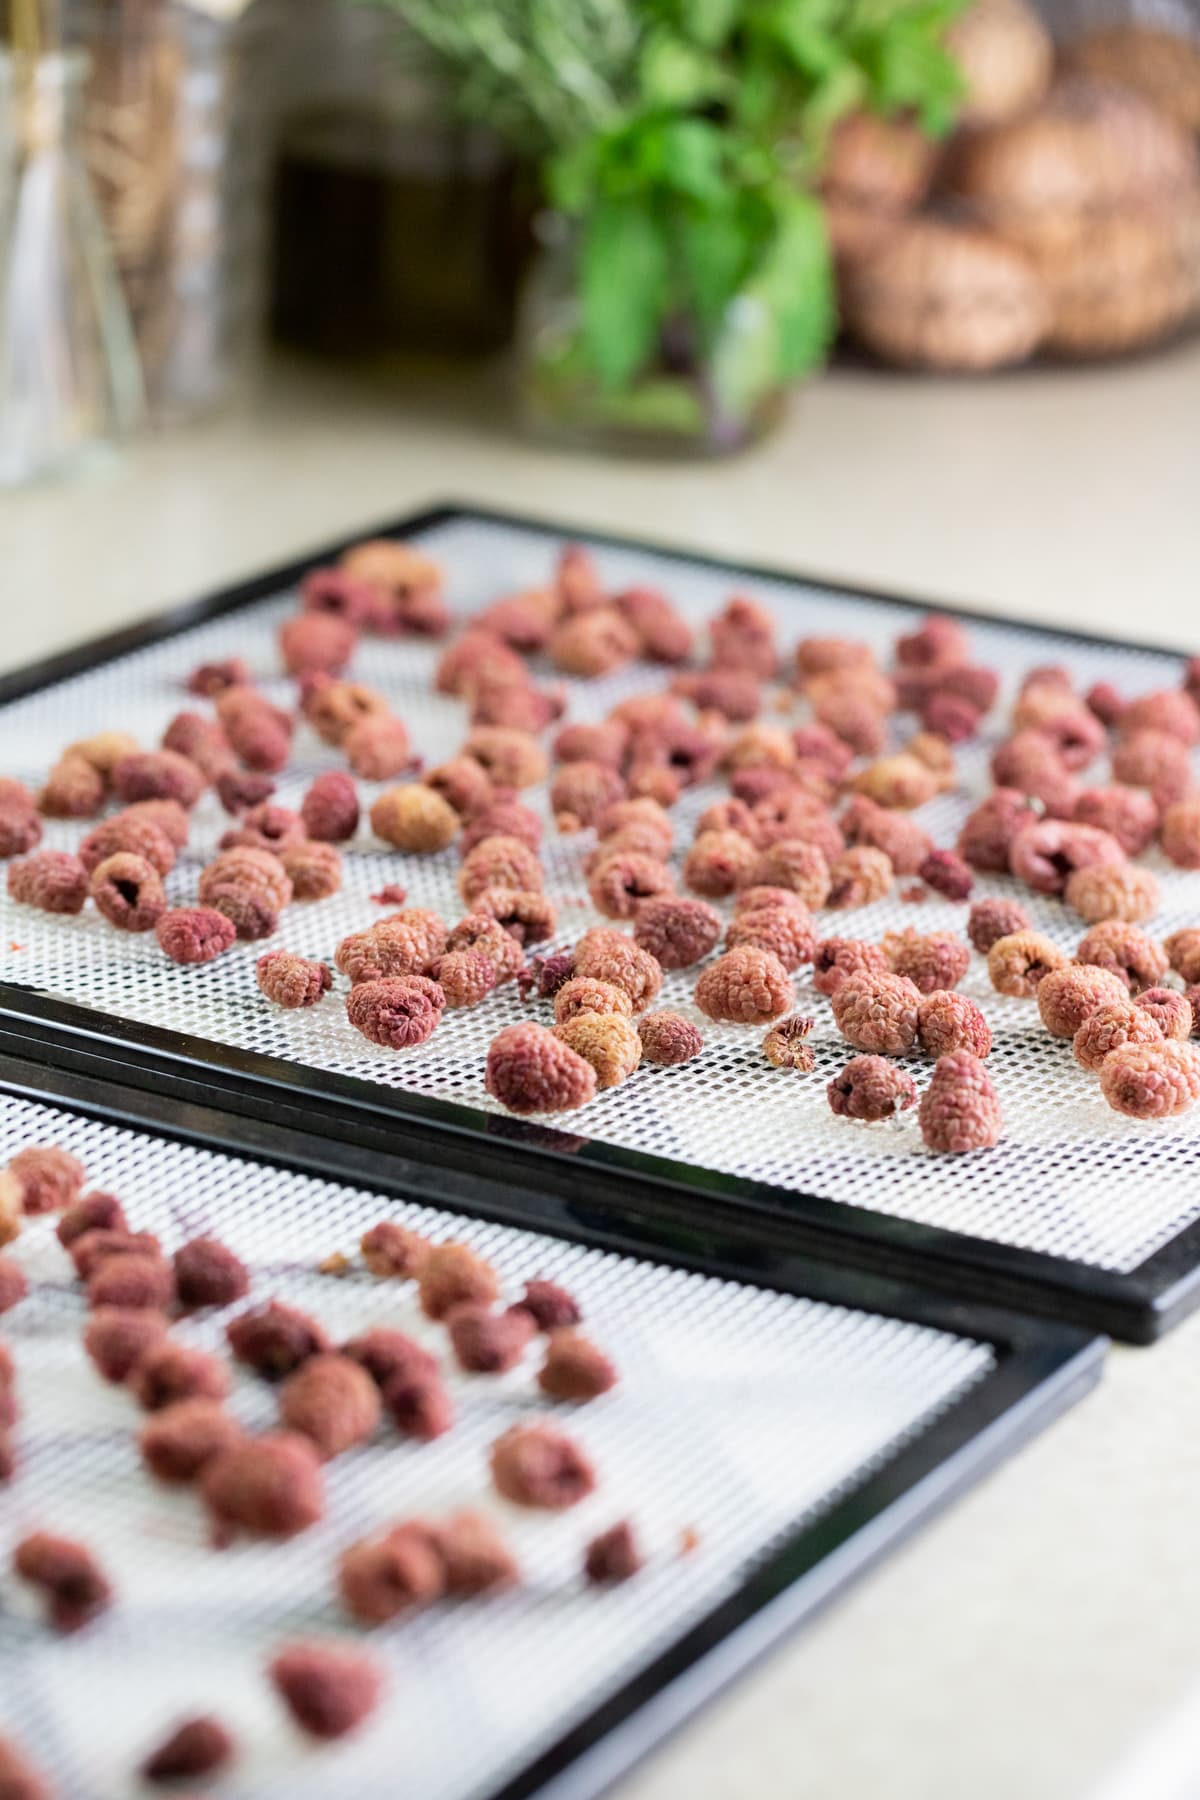 dehydrated raspberries on the trays of the dehydrator